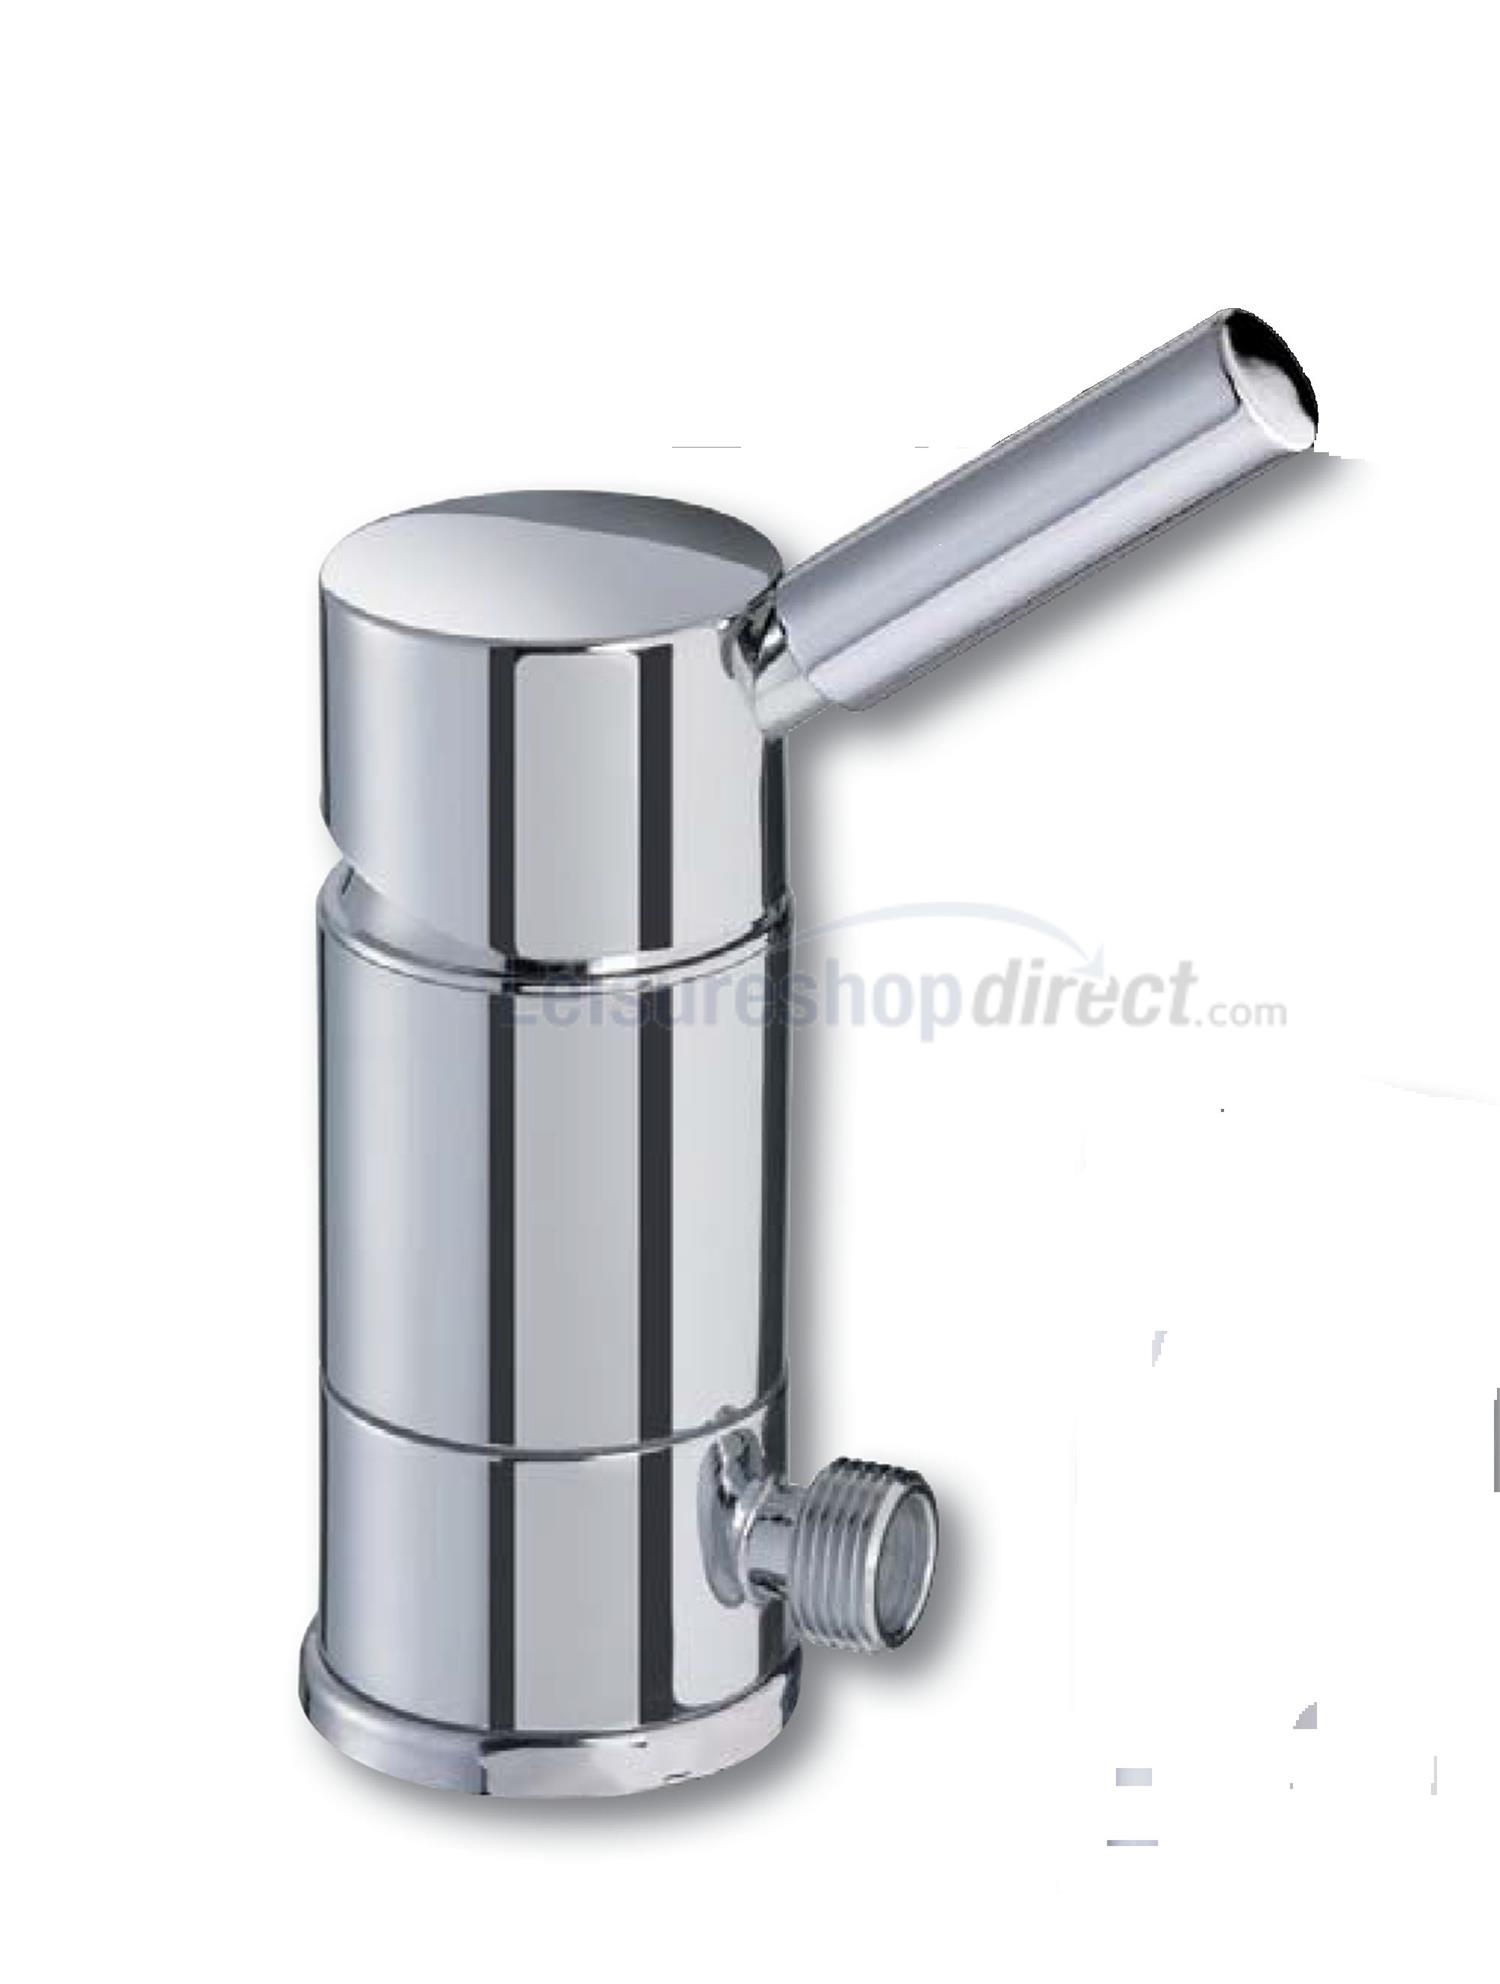 Reich Trend E Chrome Mixer Tap 33mm with Tails 